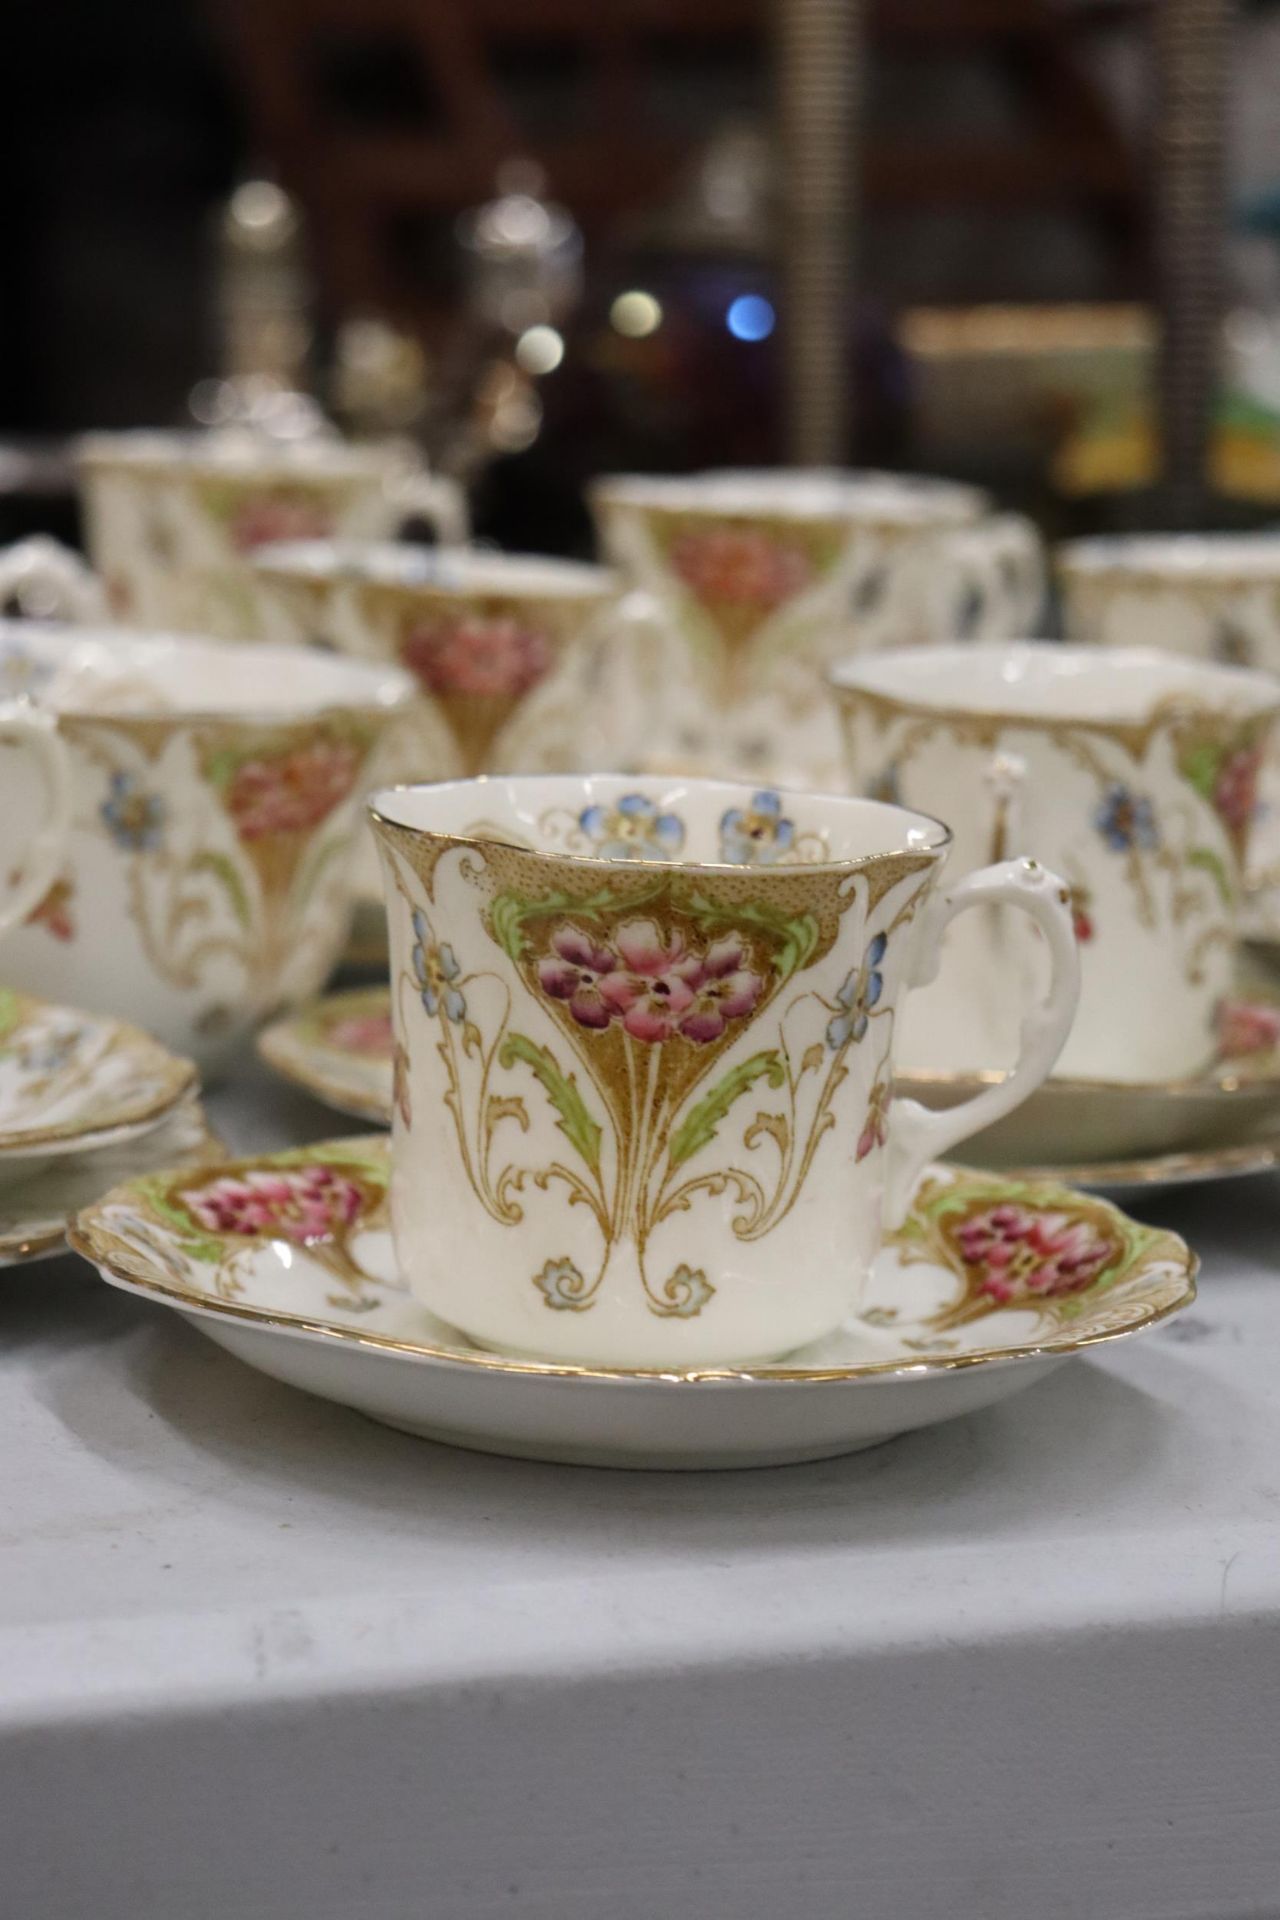 A LATE 18TH/EARLY 19TH CENTURY TEASET BY FRED B PEARCE & CO, LONDON, TO INCLUDE CAKE PLATES, A CREAM - Image 2 of 10